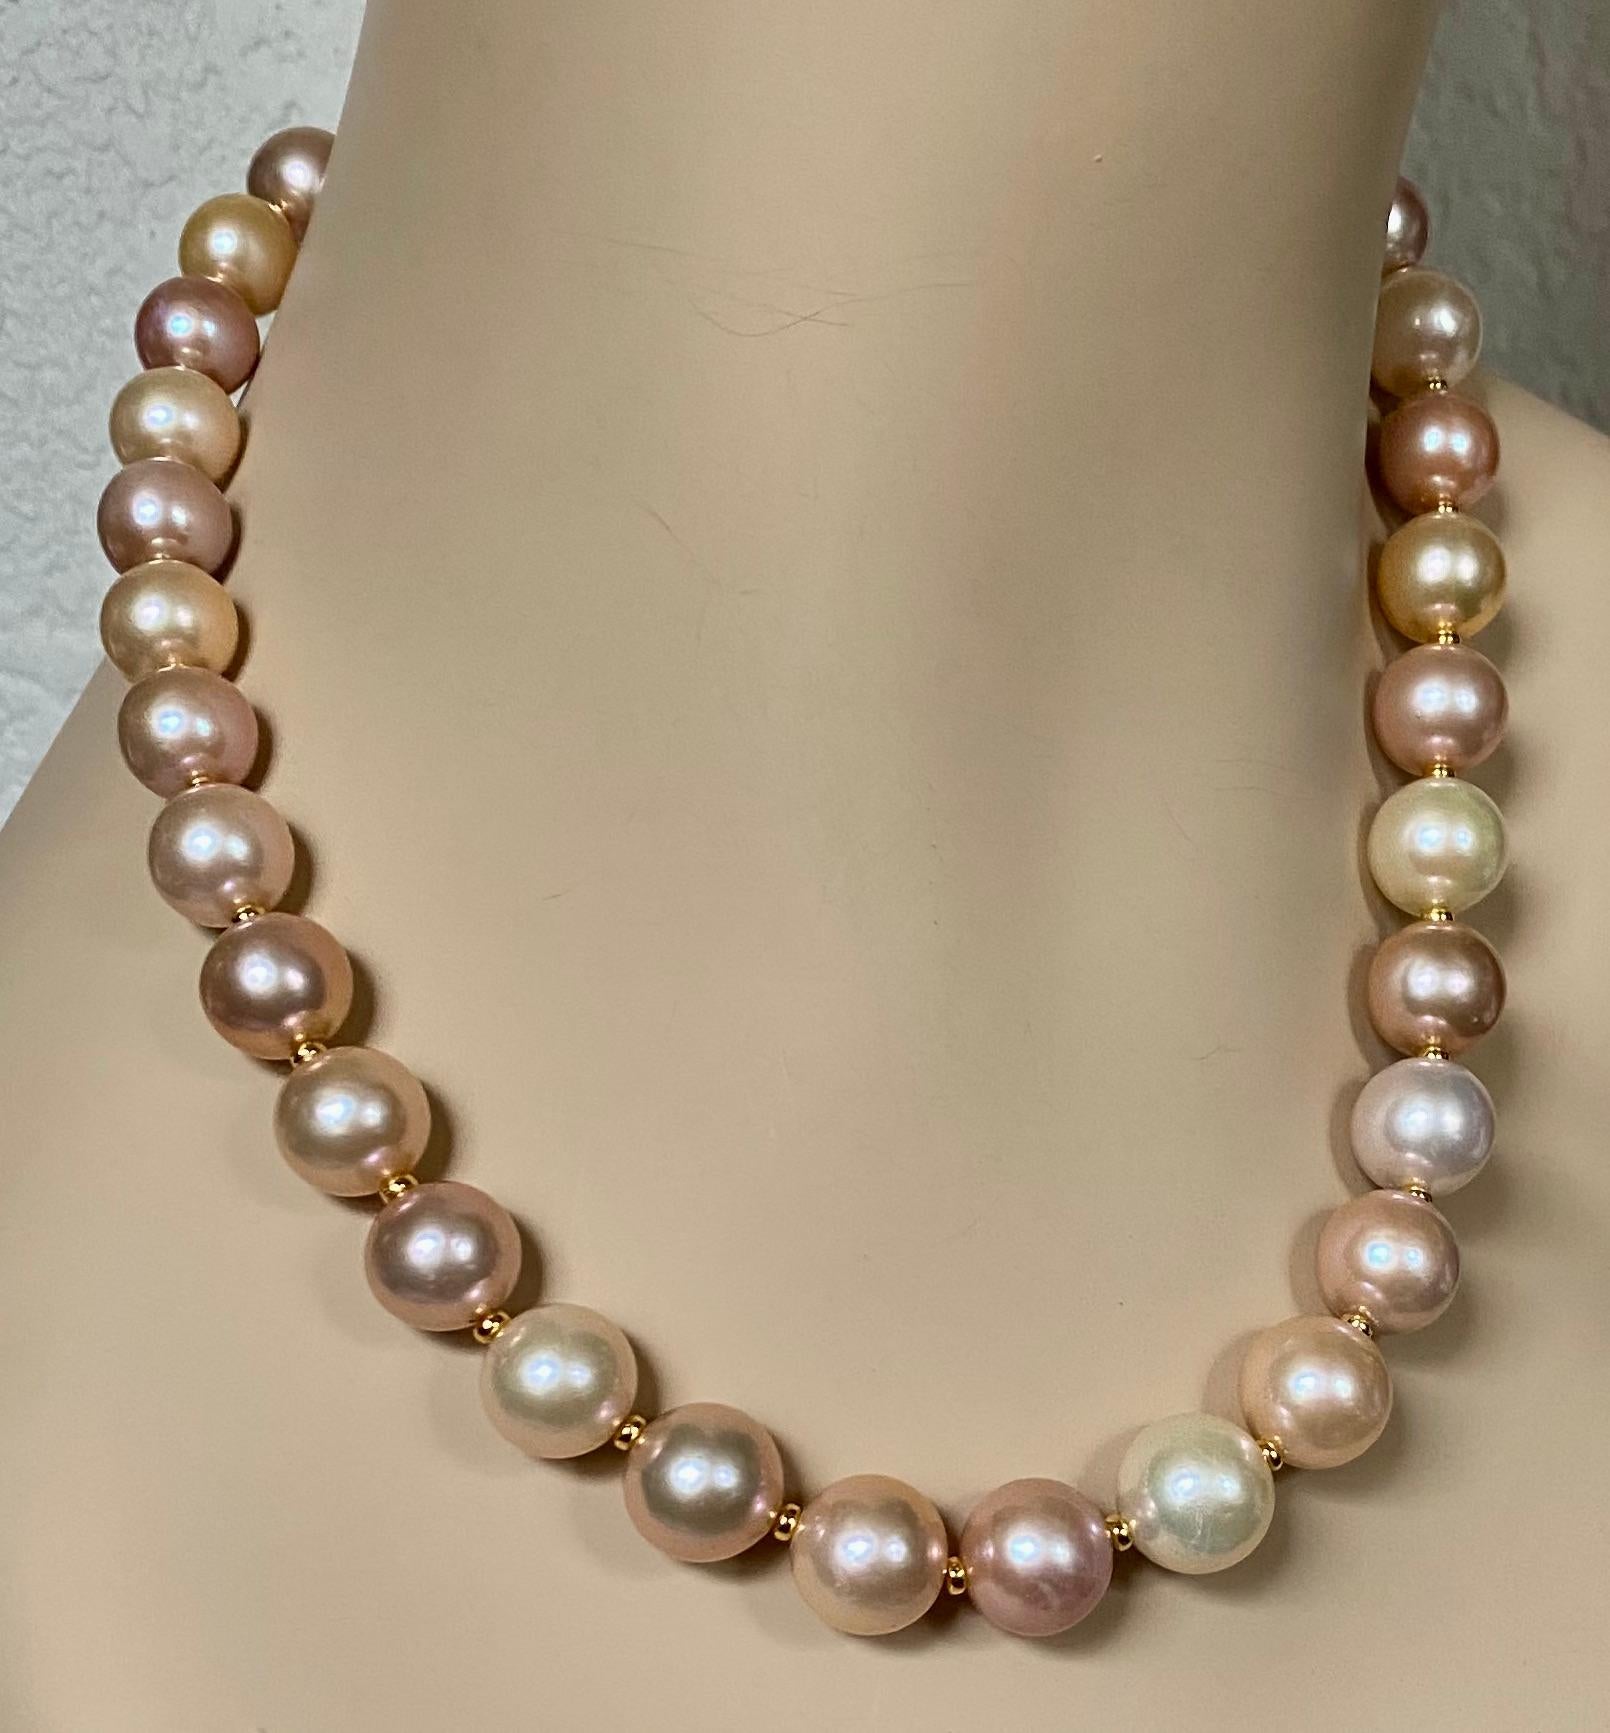 Freshwater pearls in shades of peach, lavender, cream and pink are mixed together to create this superb necklace.  Thirty two huge pearls (origin: China) are slightly graduated in size from 12.5mm (1/2 inch) to 14.5mm (5/8 inch).  They are blemish